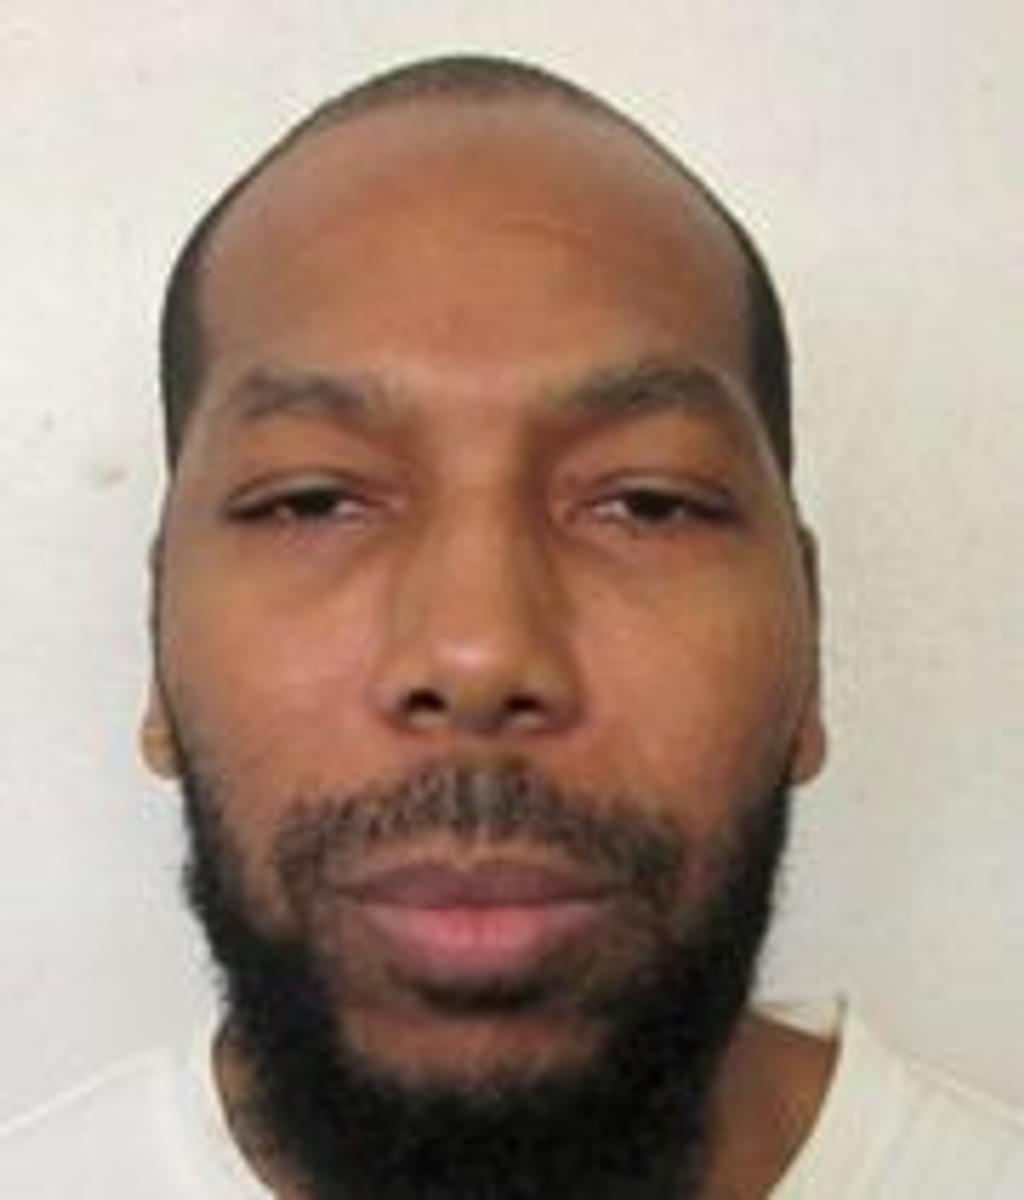 Supreme Court’s Intervention to Allow Execution of Domineque Ray Provokes Widespread Condemnation